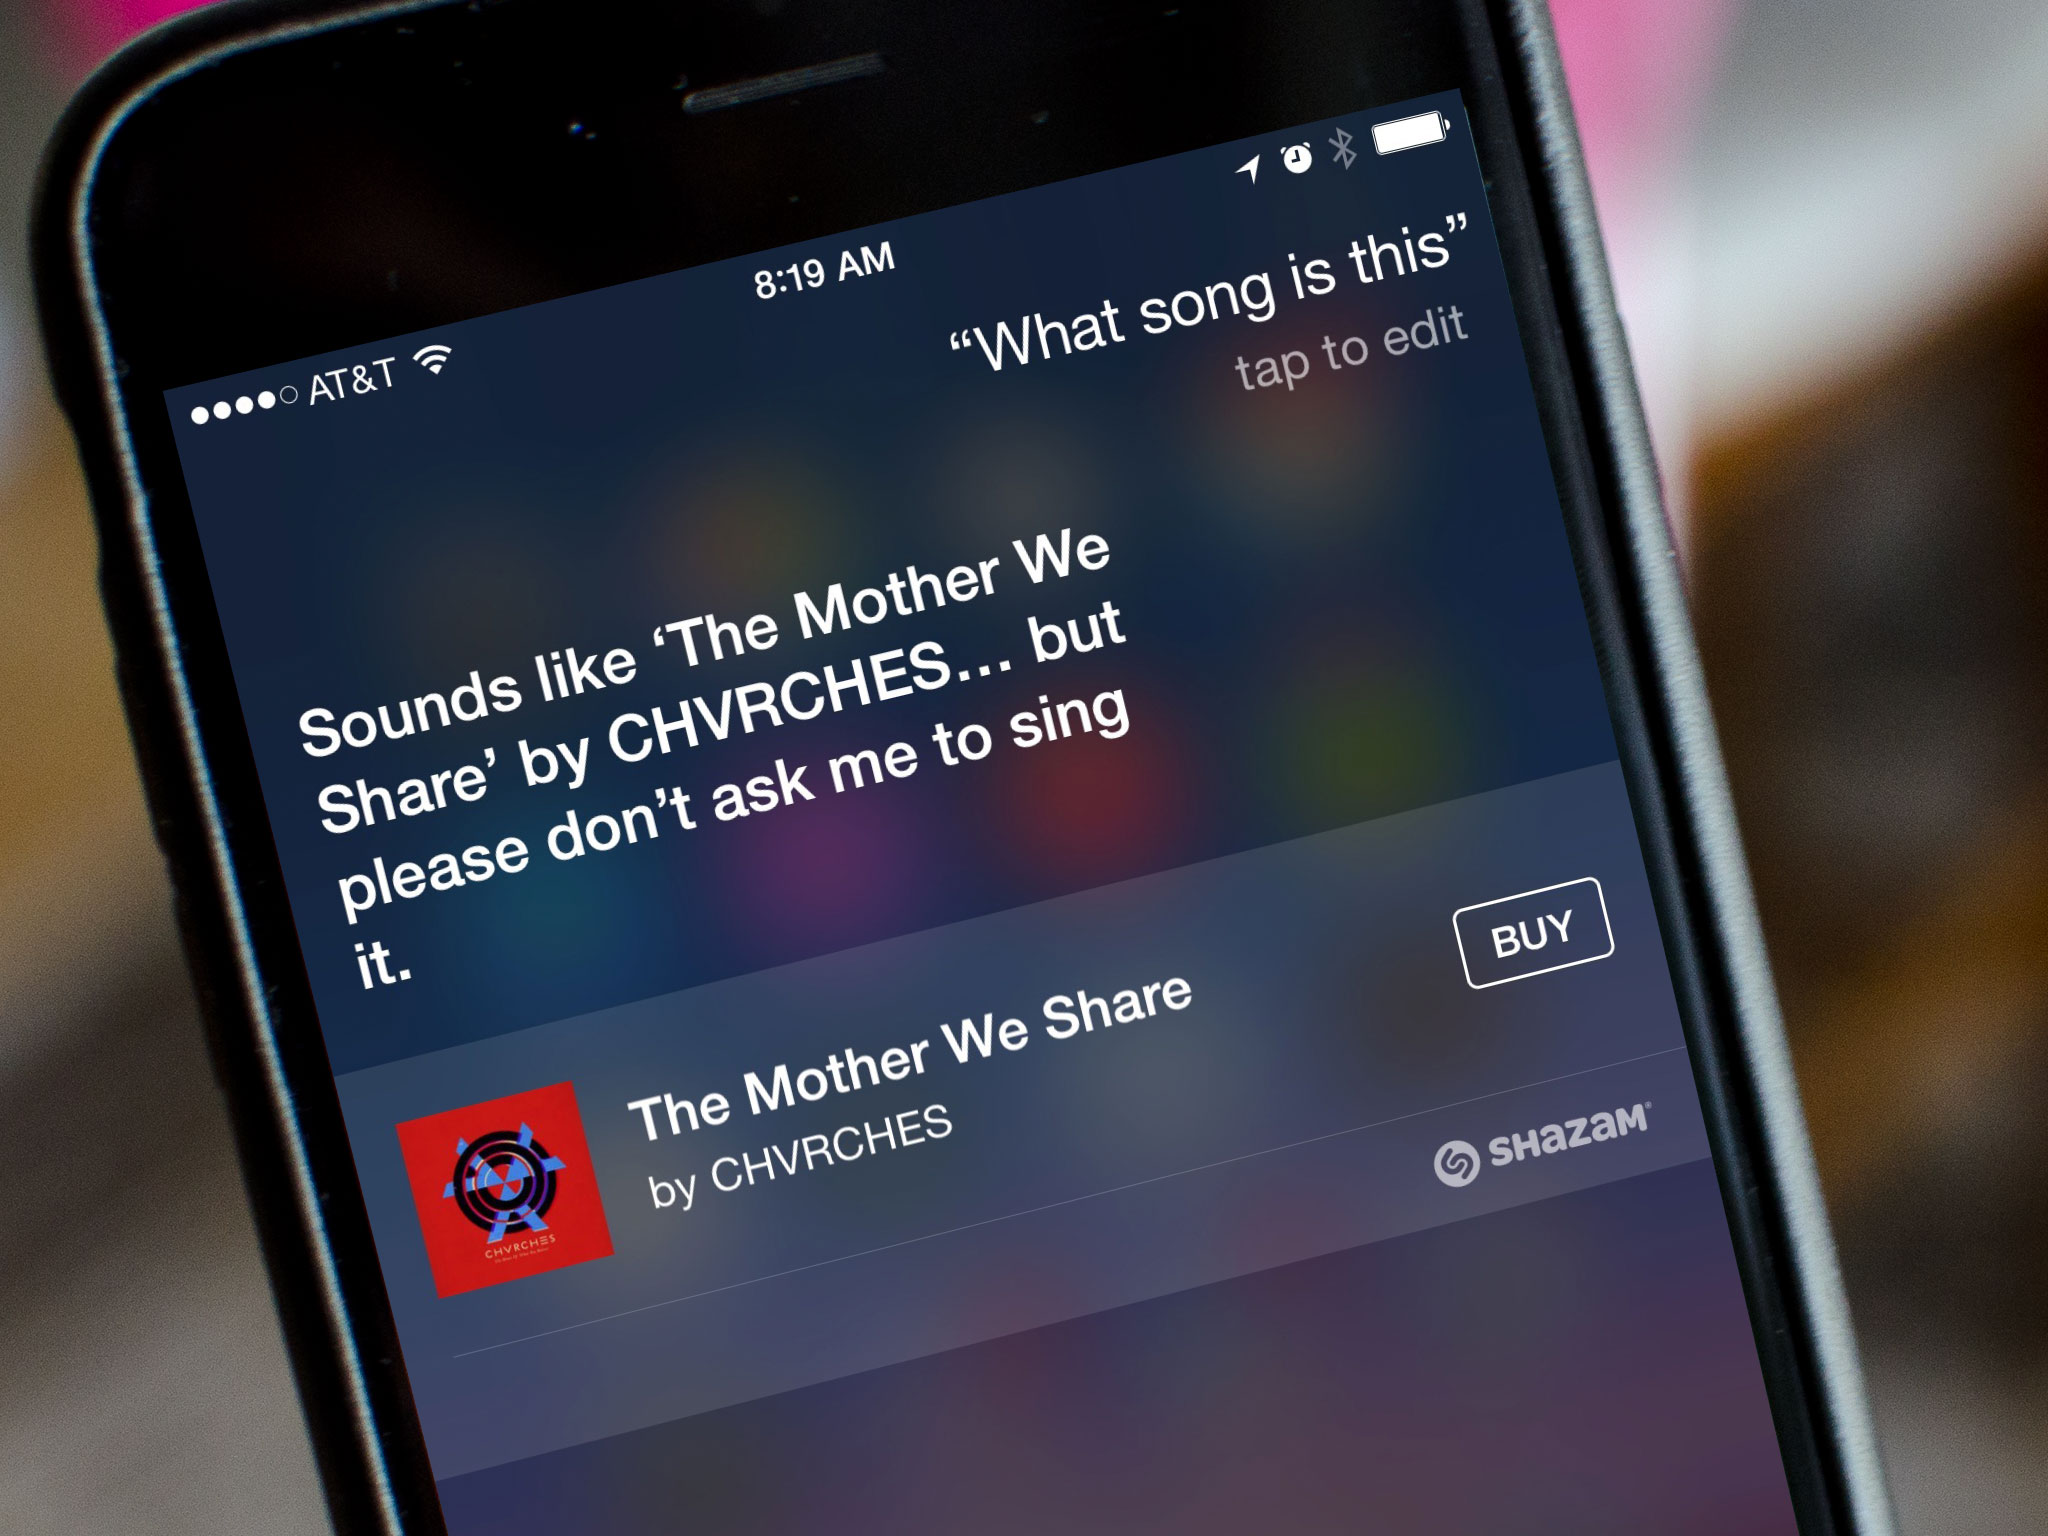 How to identify what song is play with Siri and Shazam